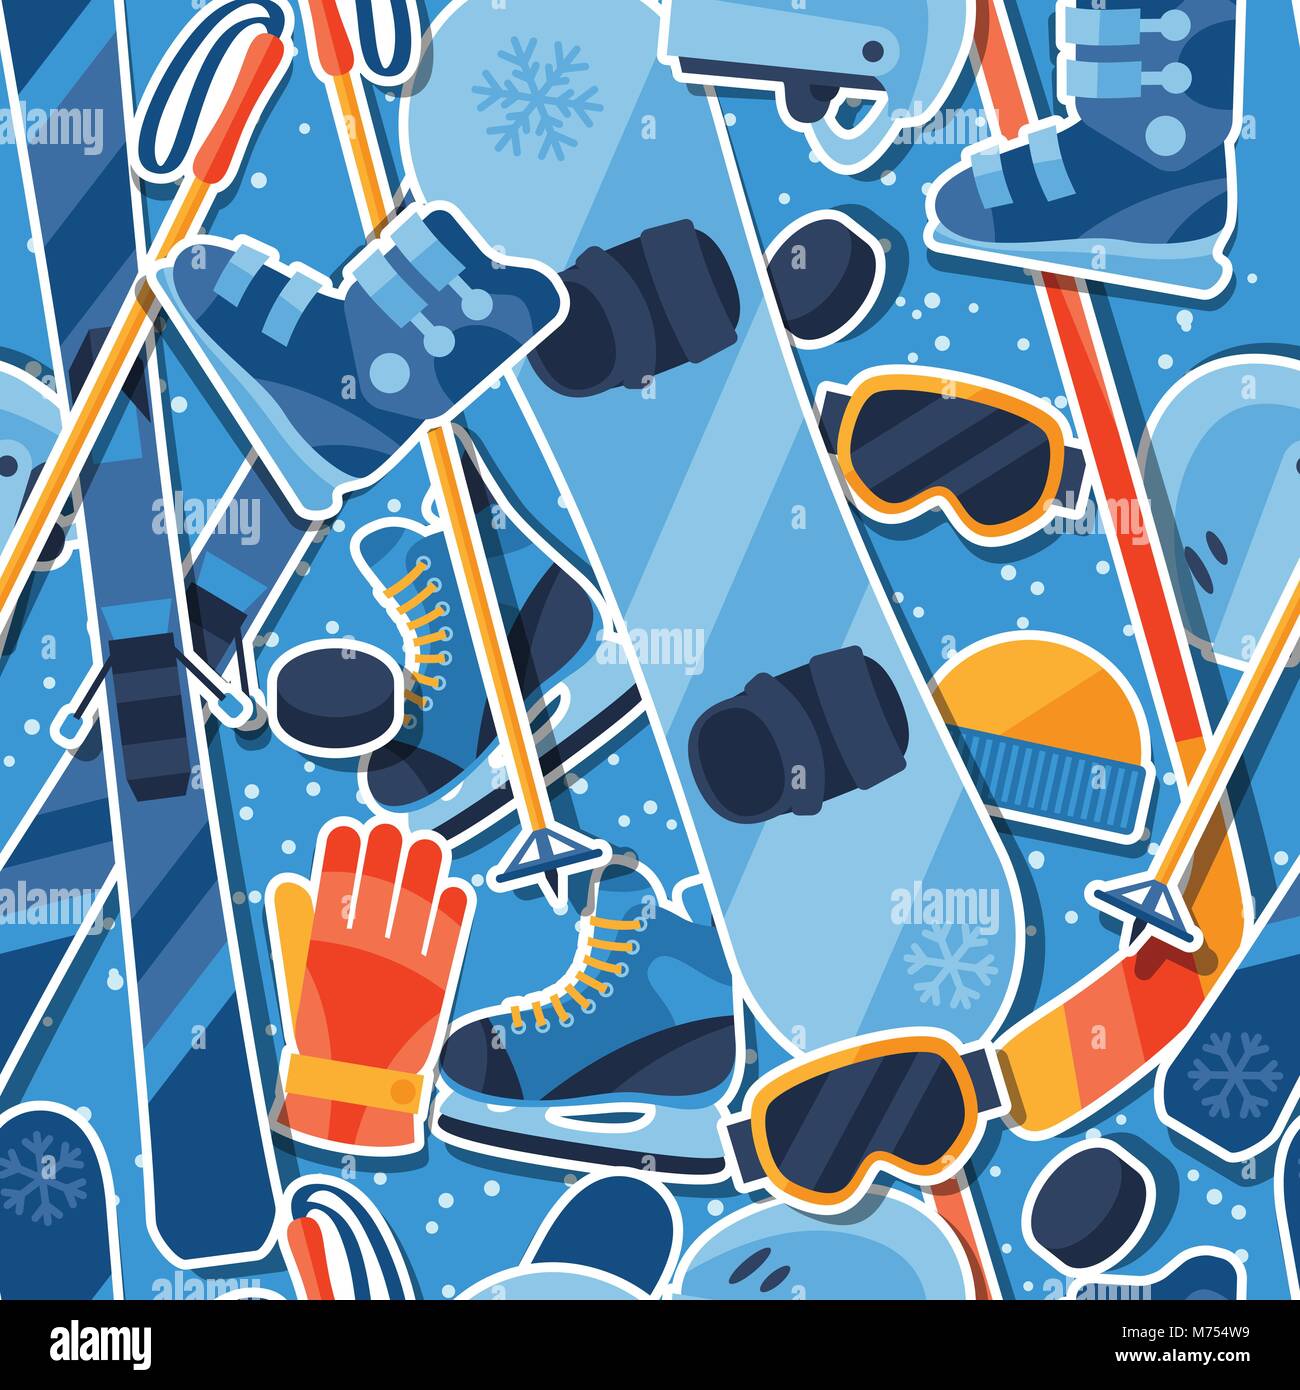 Winter sports seamless pattern with equipment sticker icons Stock Vector